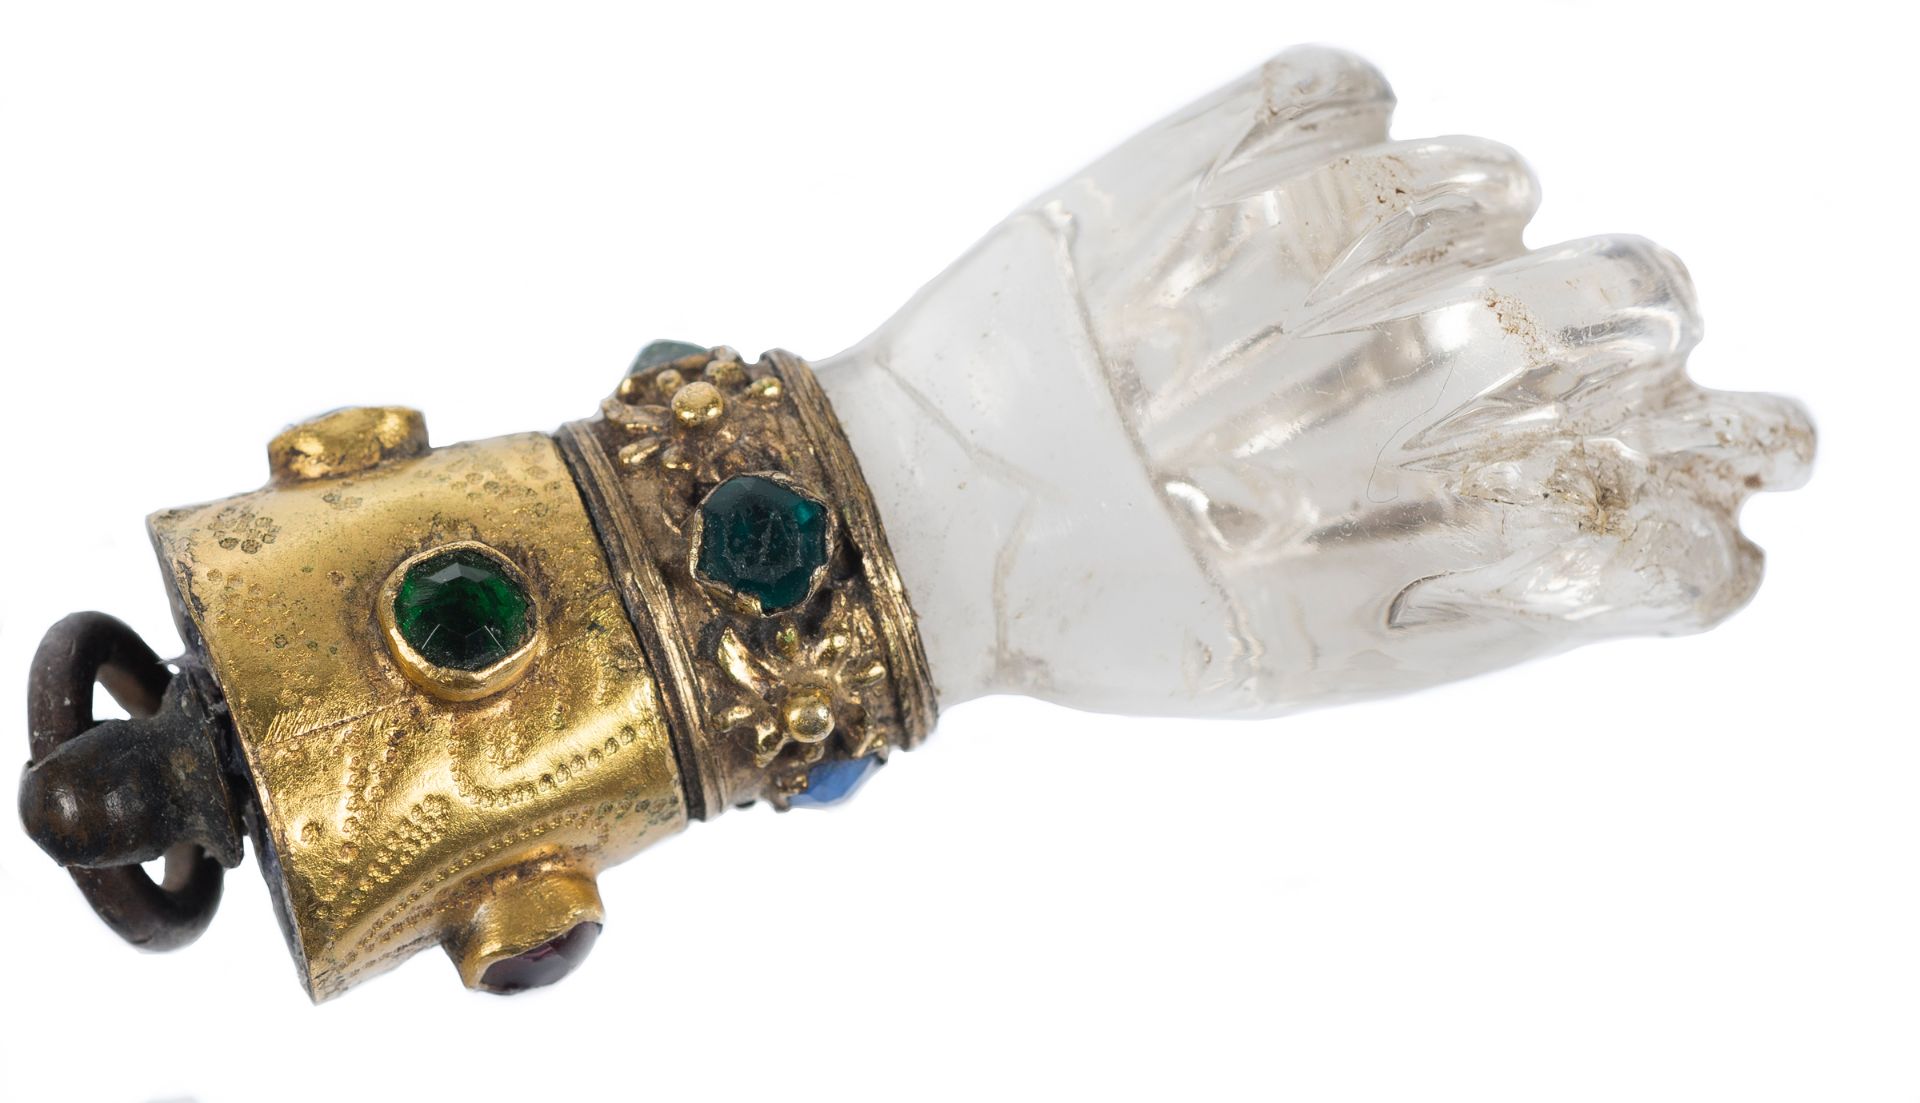 Rock crystal and gilded copper figa with precious stone cabochons. Gothic. 15th century.